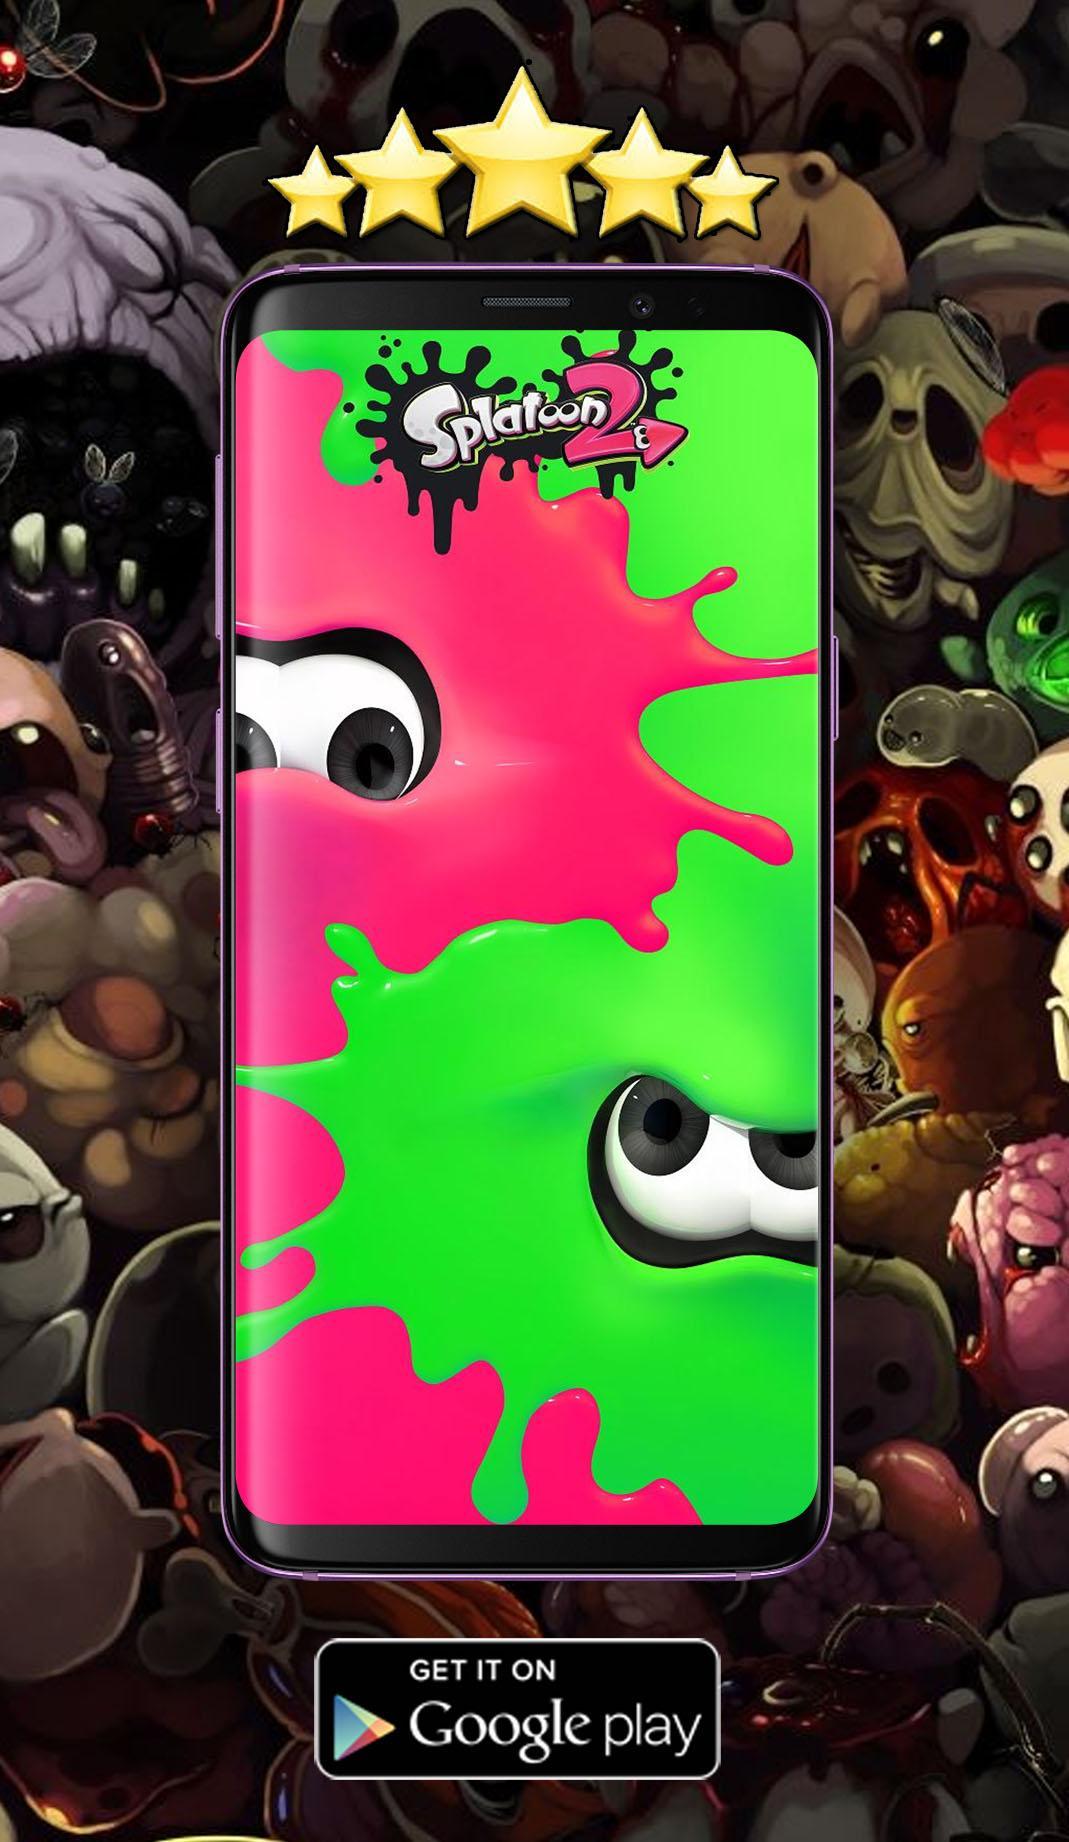 splatoon 2 wallpaper hd for android apk download